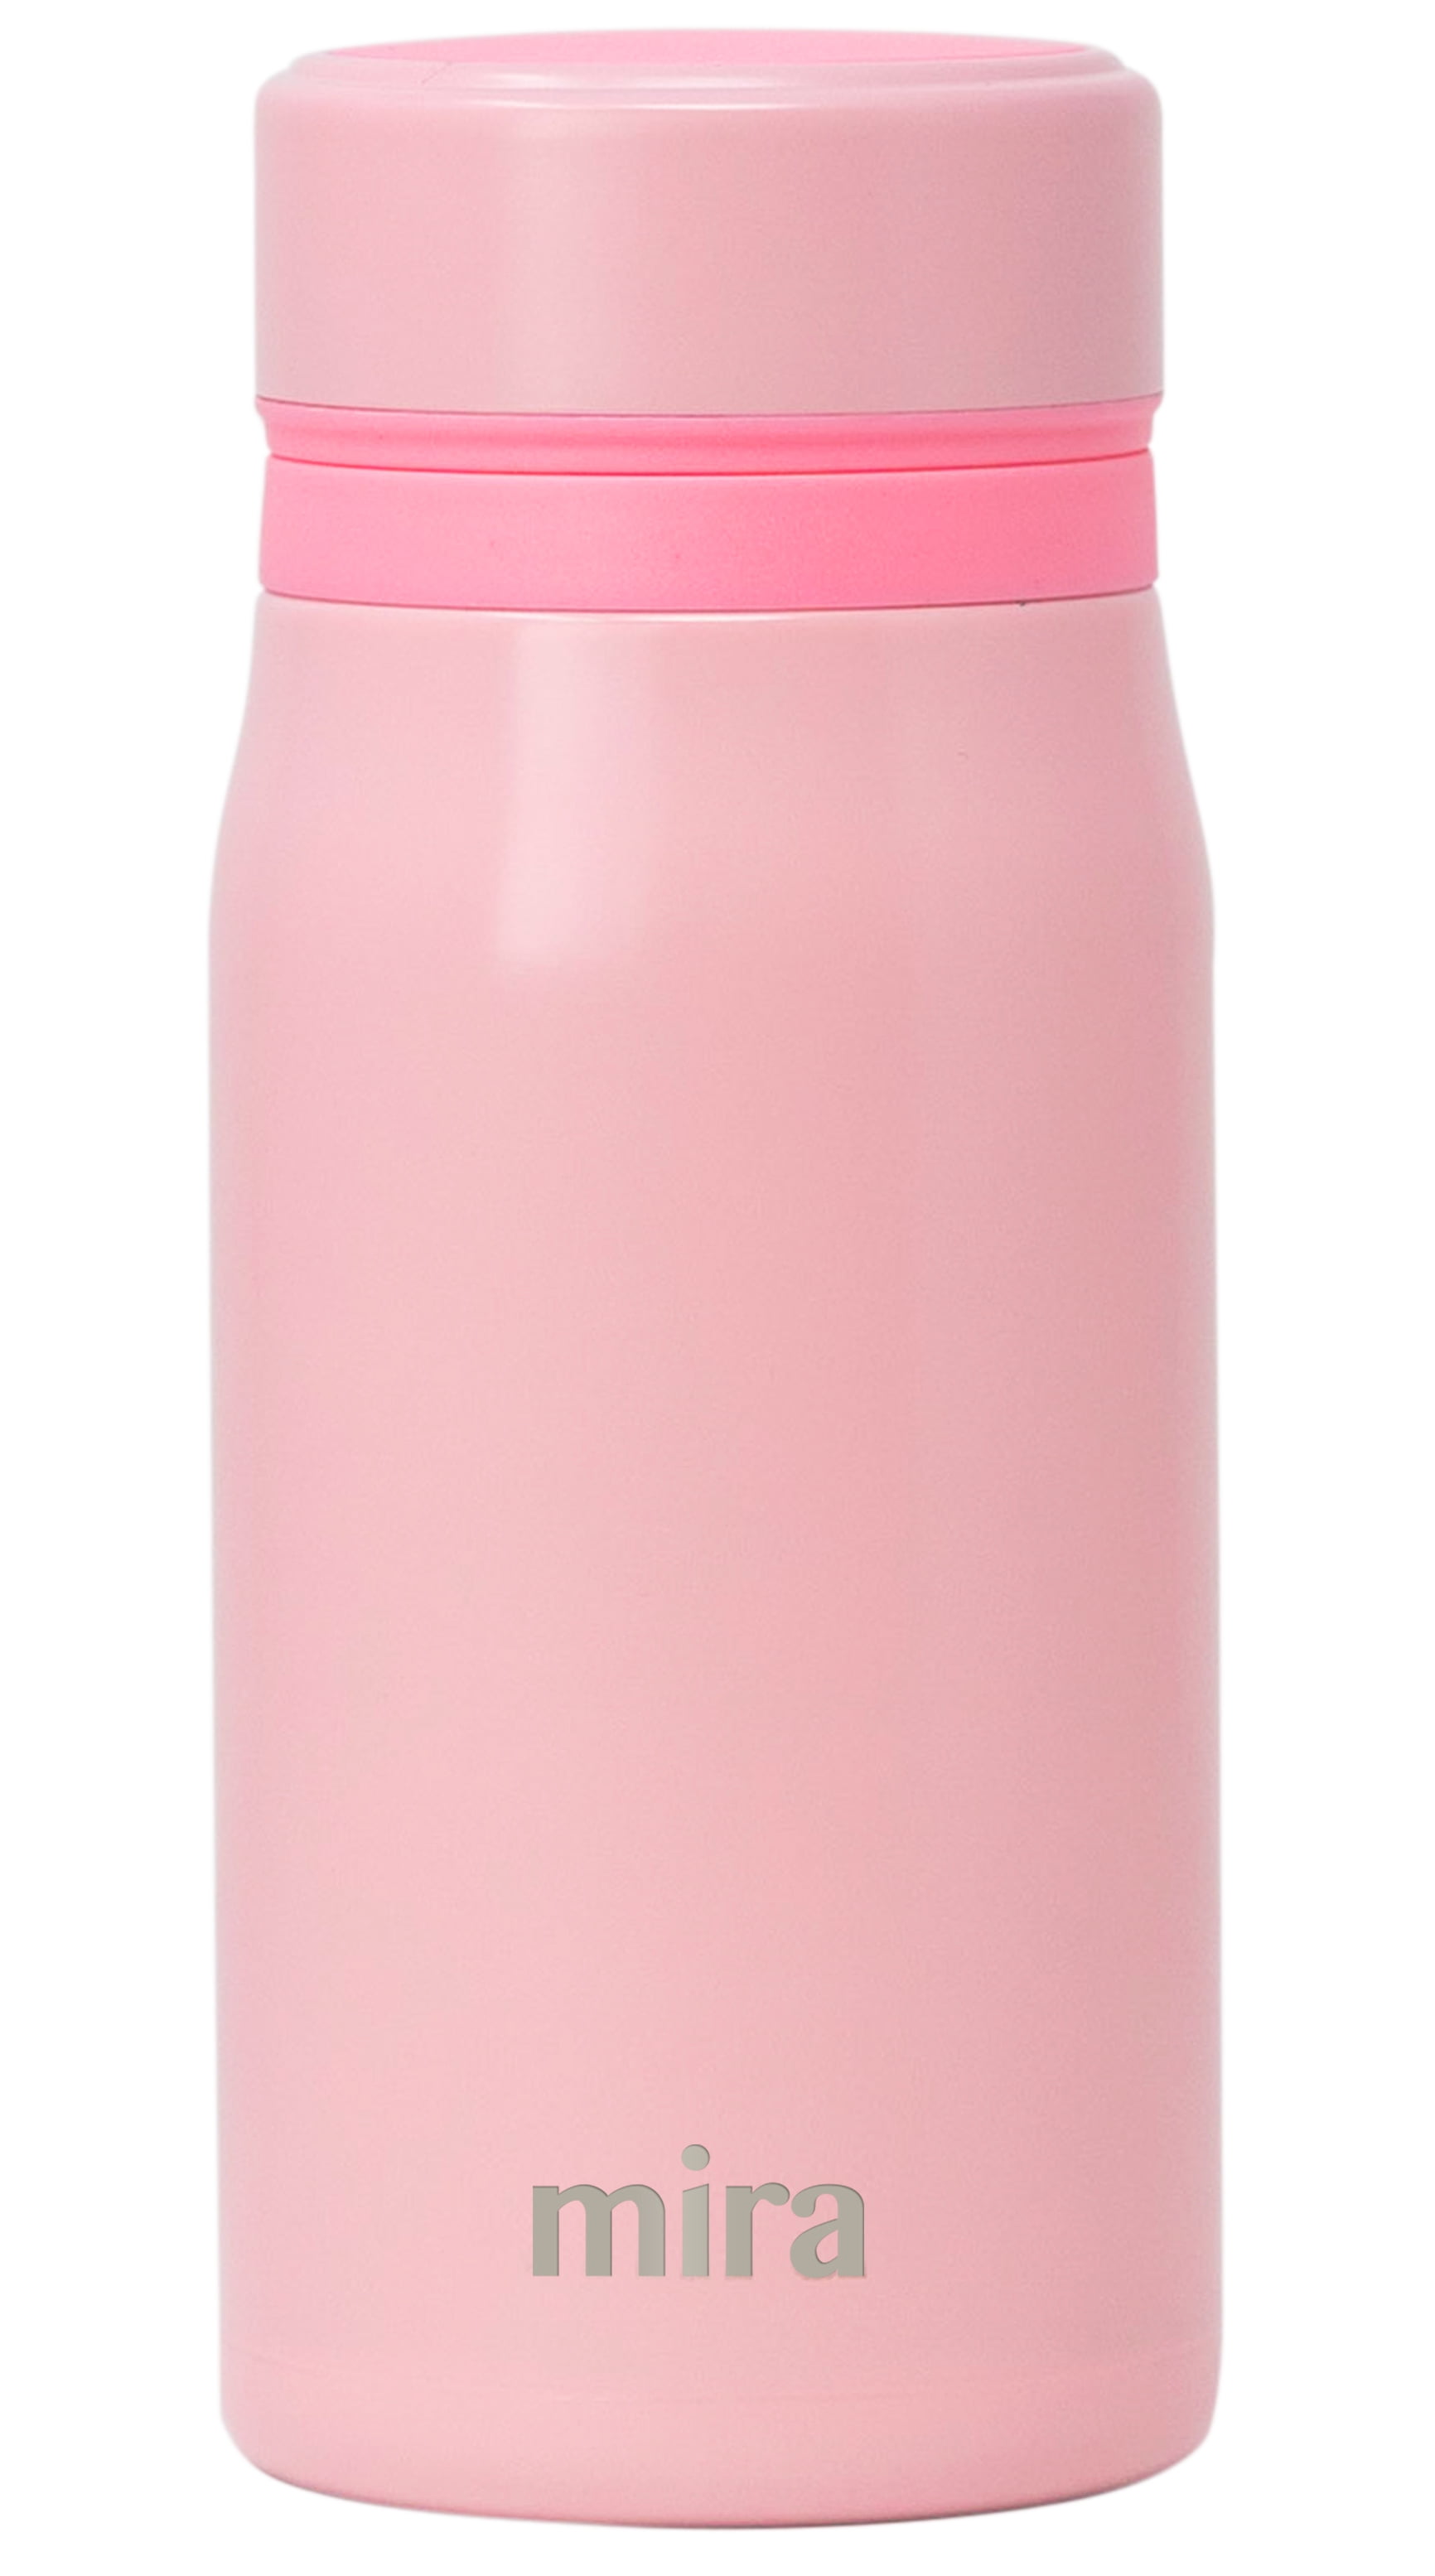 leak proof thermos flask